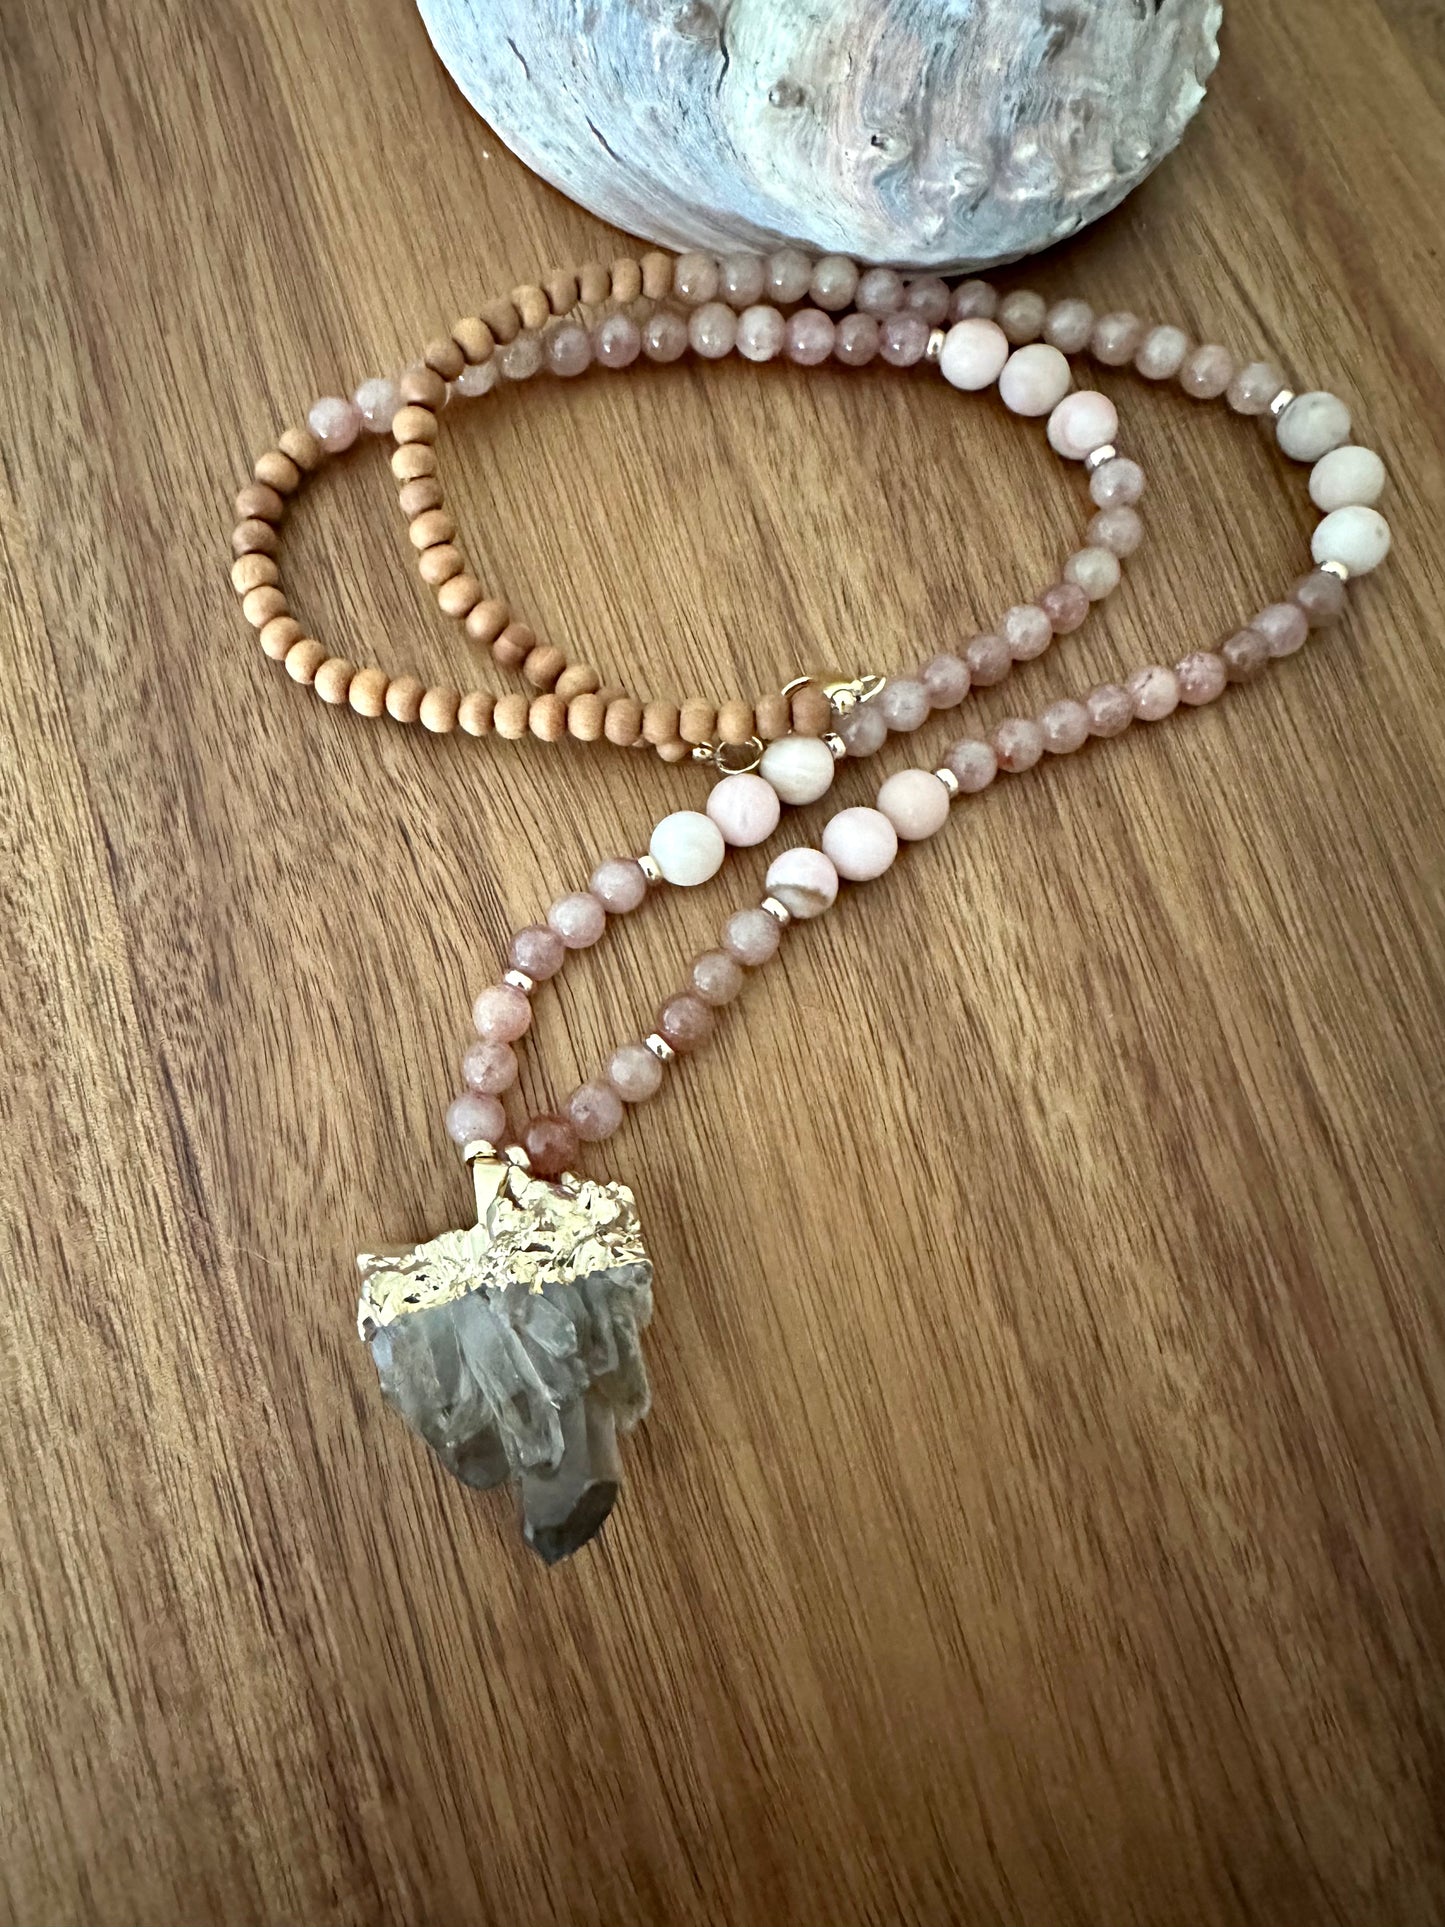 a necklace semi coiled up with pink stone beads, and wooden beads with a large smokey quartz pendant on a wooden board with an abalone shell in the background